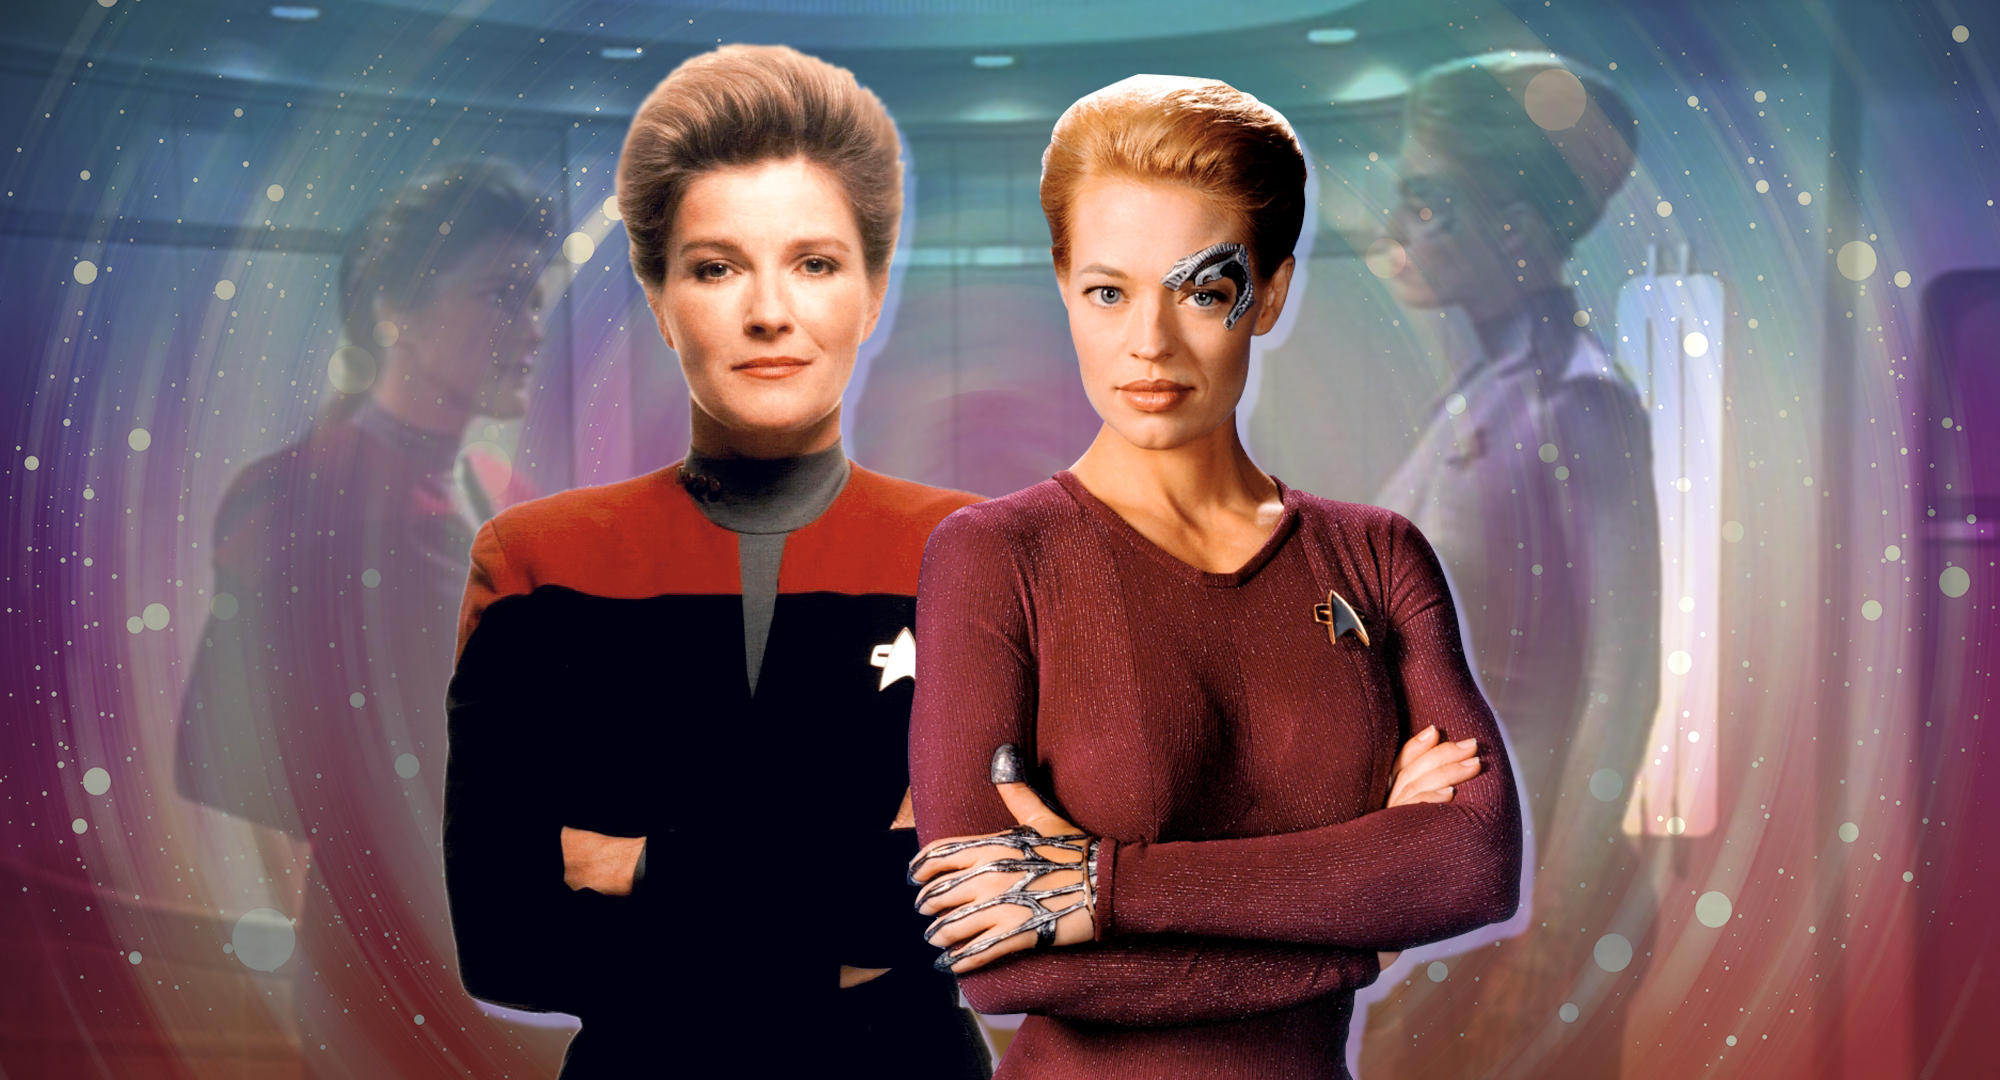 Captain Janeway and Seven of Nine's Relationship was a True Gift